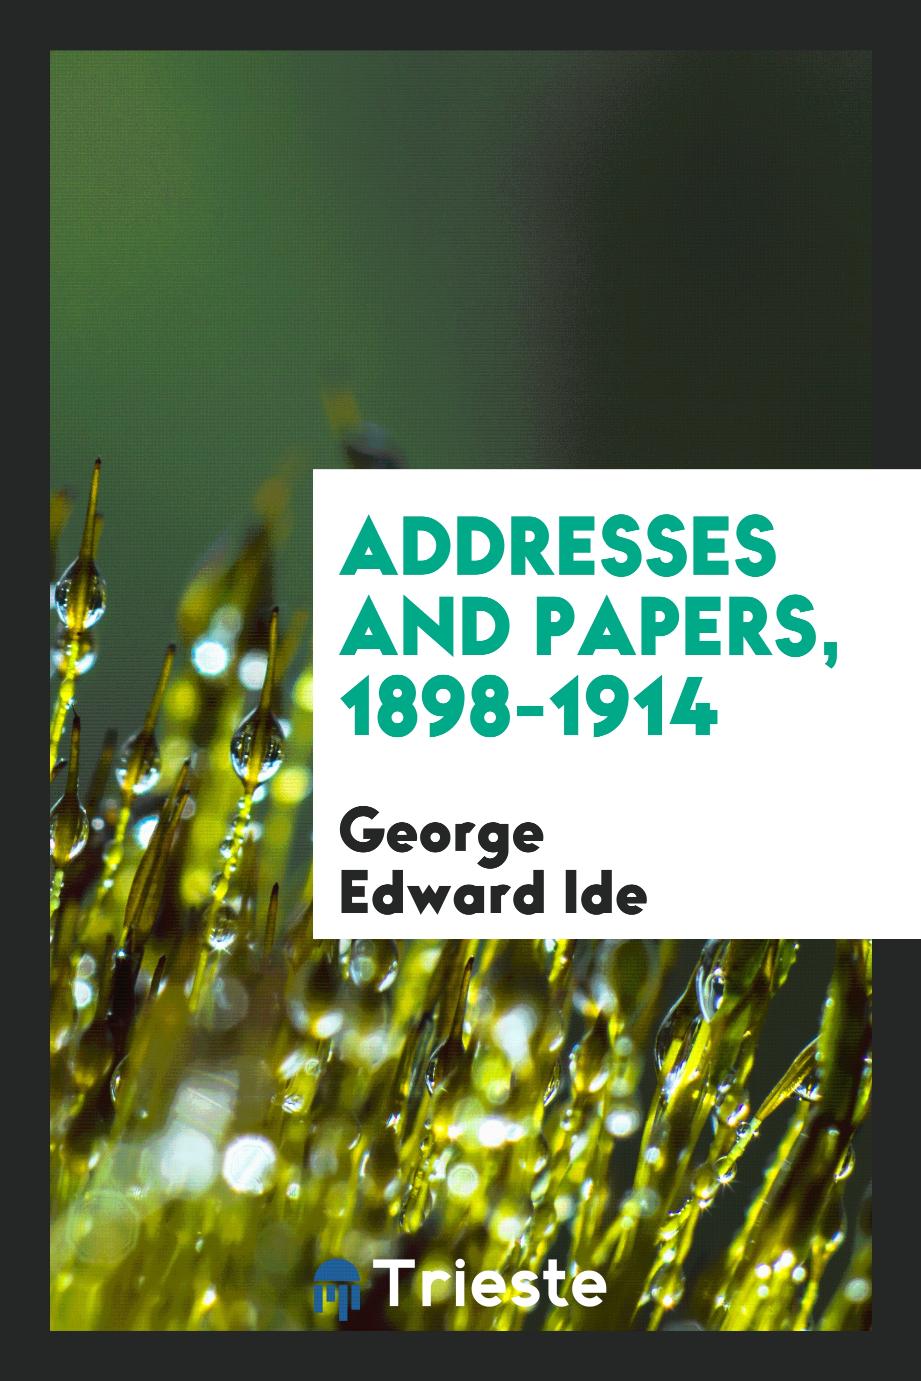 Addresses and papers, 1898-1914